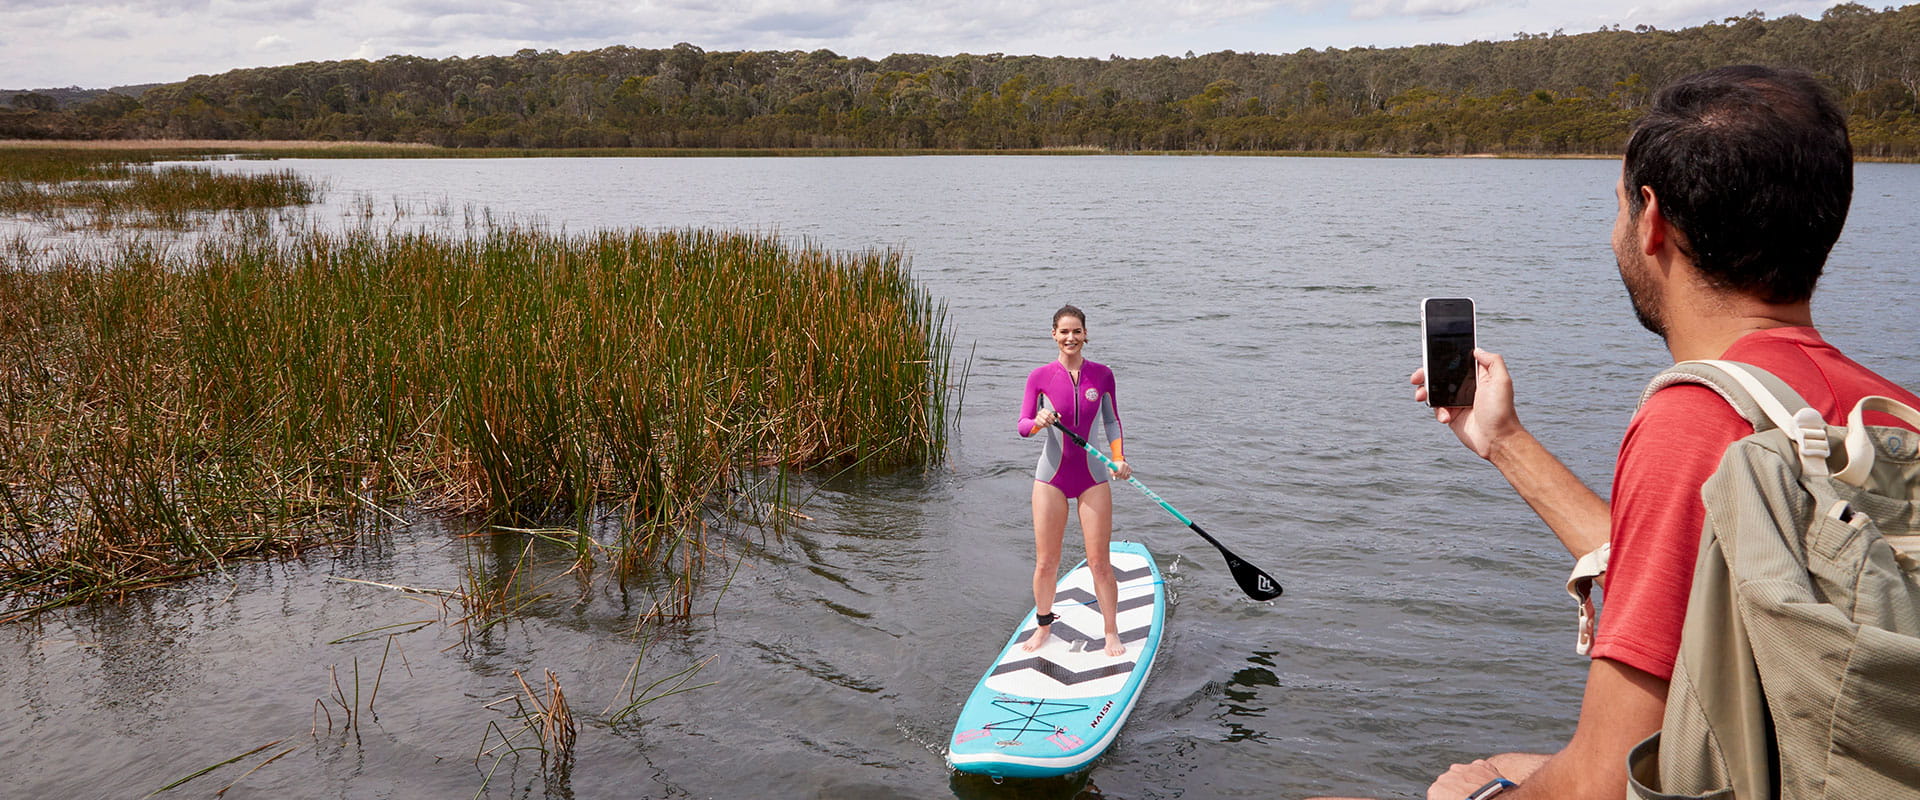 A man takes a photo from the bank of his partner on a stand-up paddle board on Lysterfield Lake.